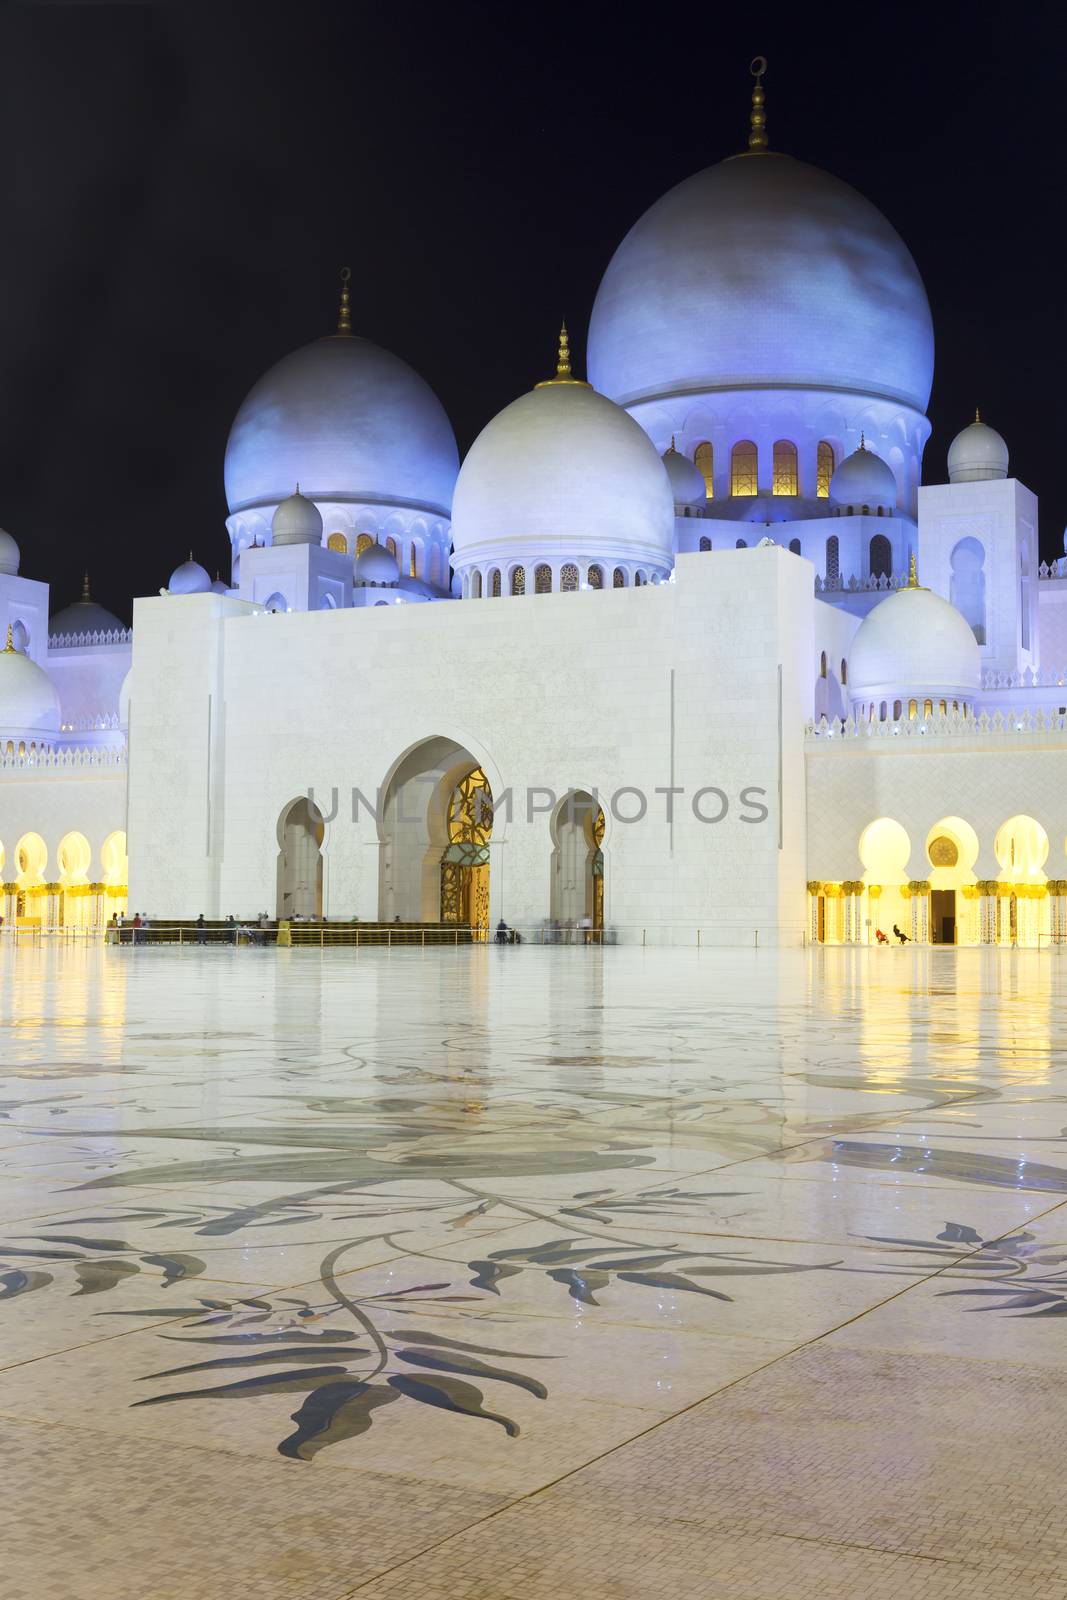 In the famous Abu Dhabi Sheikh Zayed Mosque by night by vwalakte